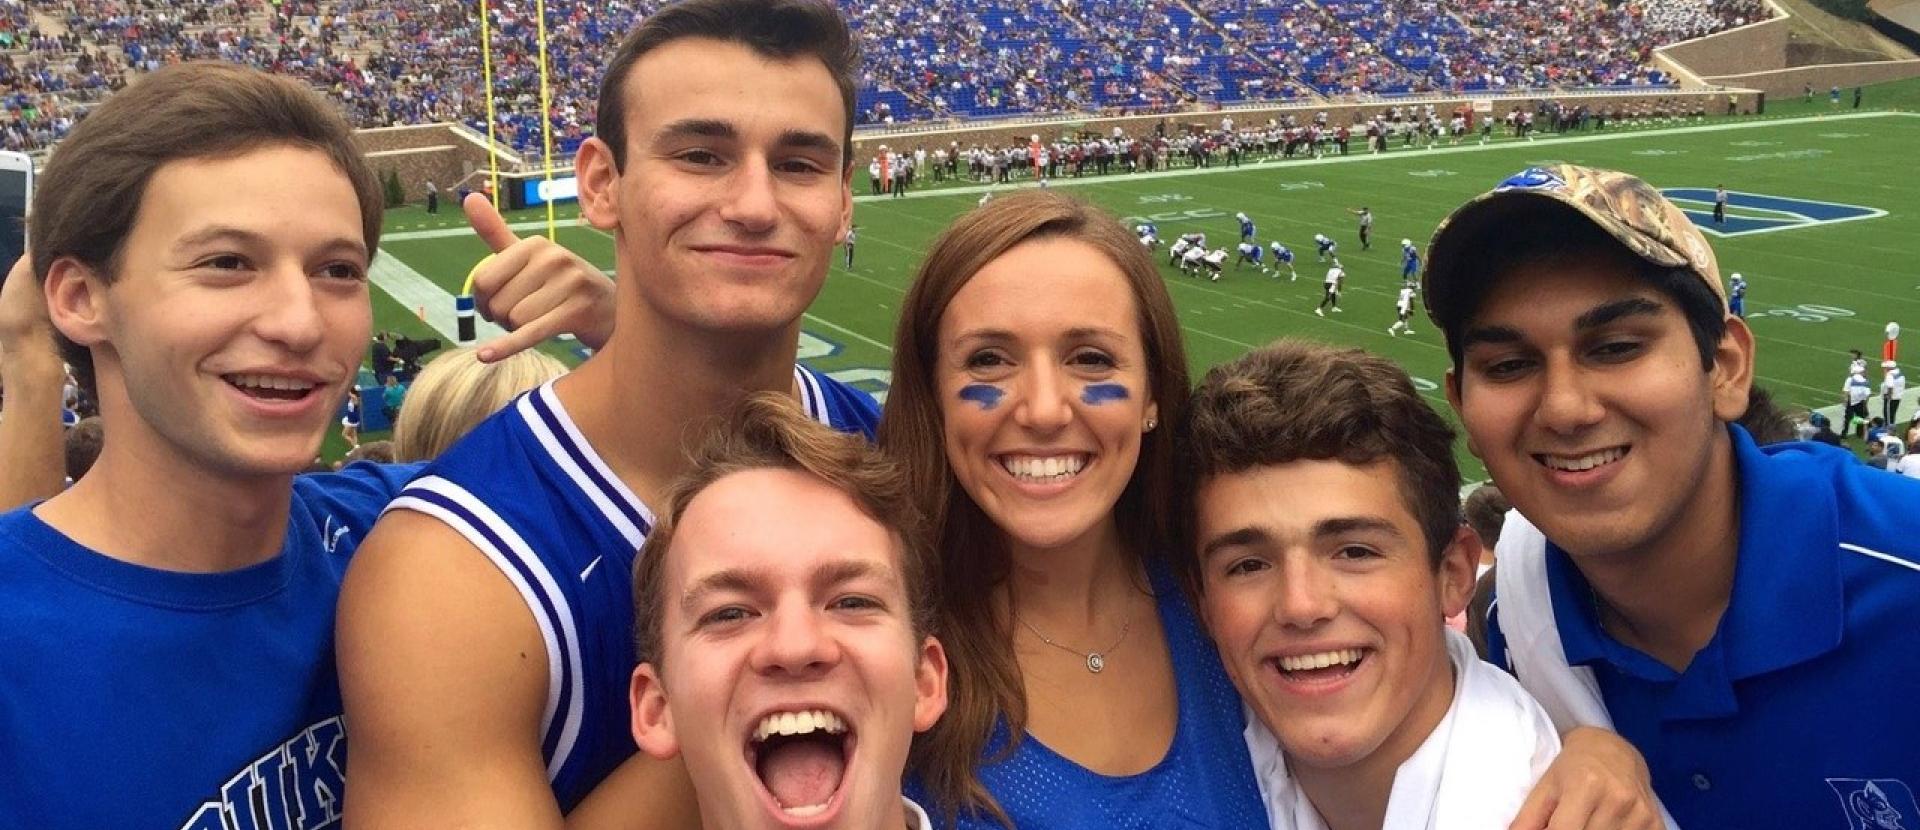 Bobby Menges and friends at Wallace Wade Stadium